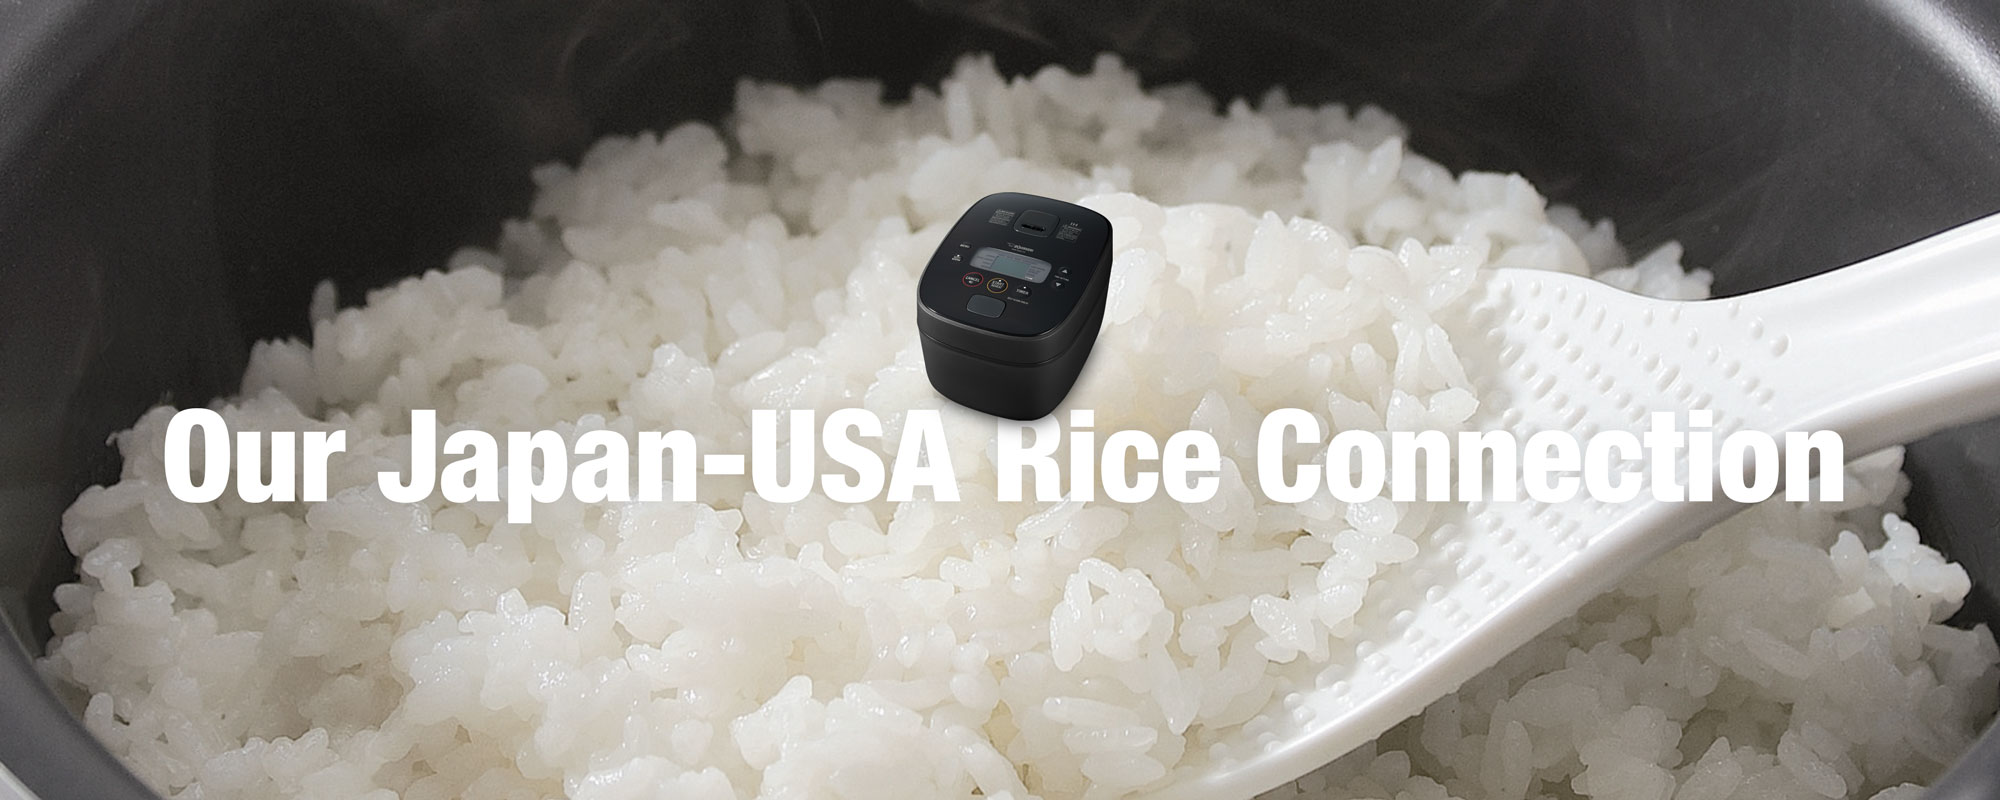 Our Japan-USA Rice Connection